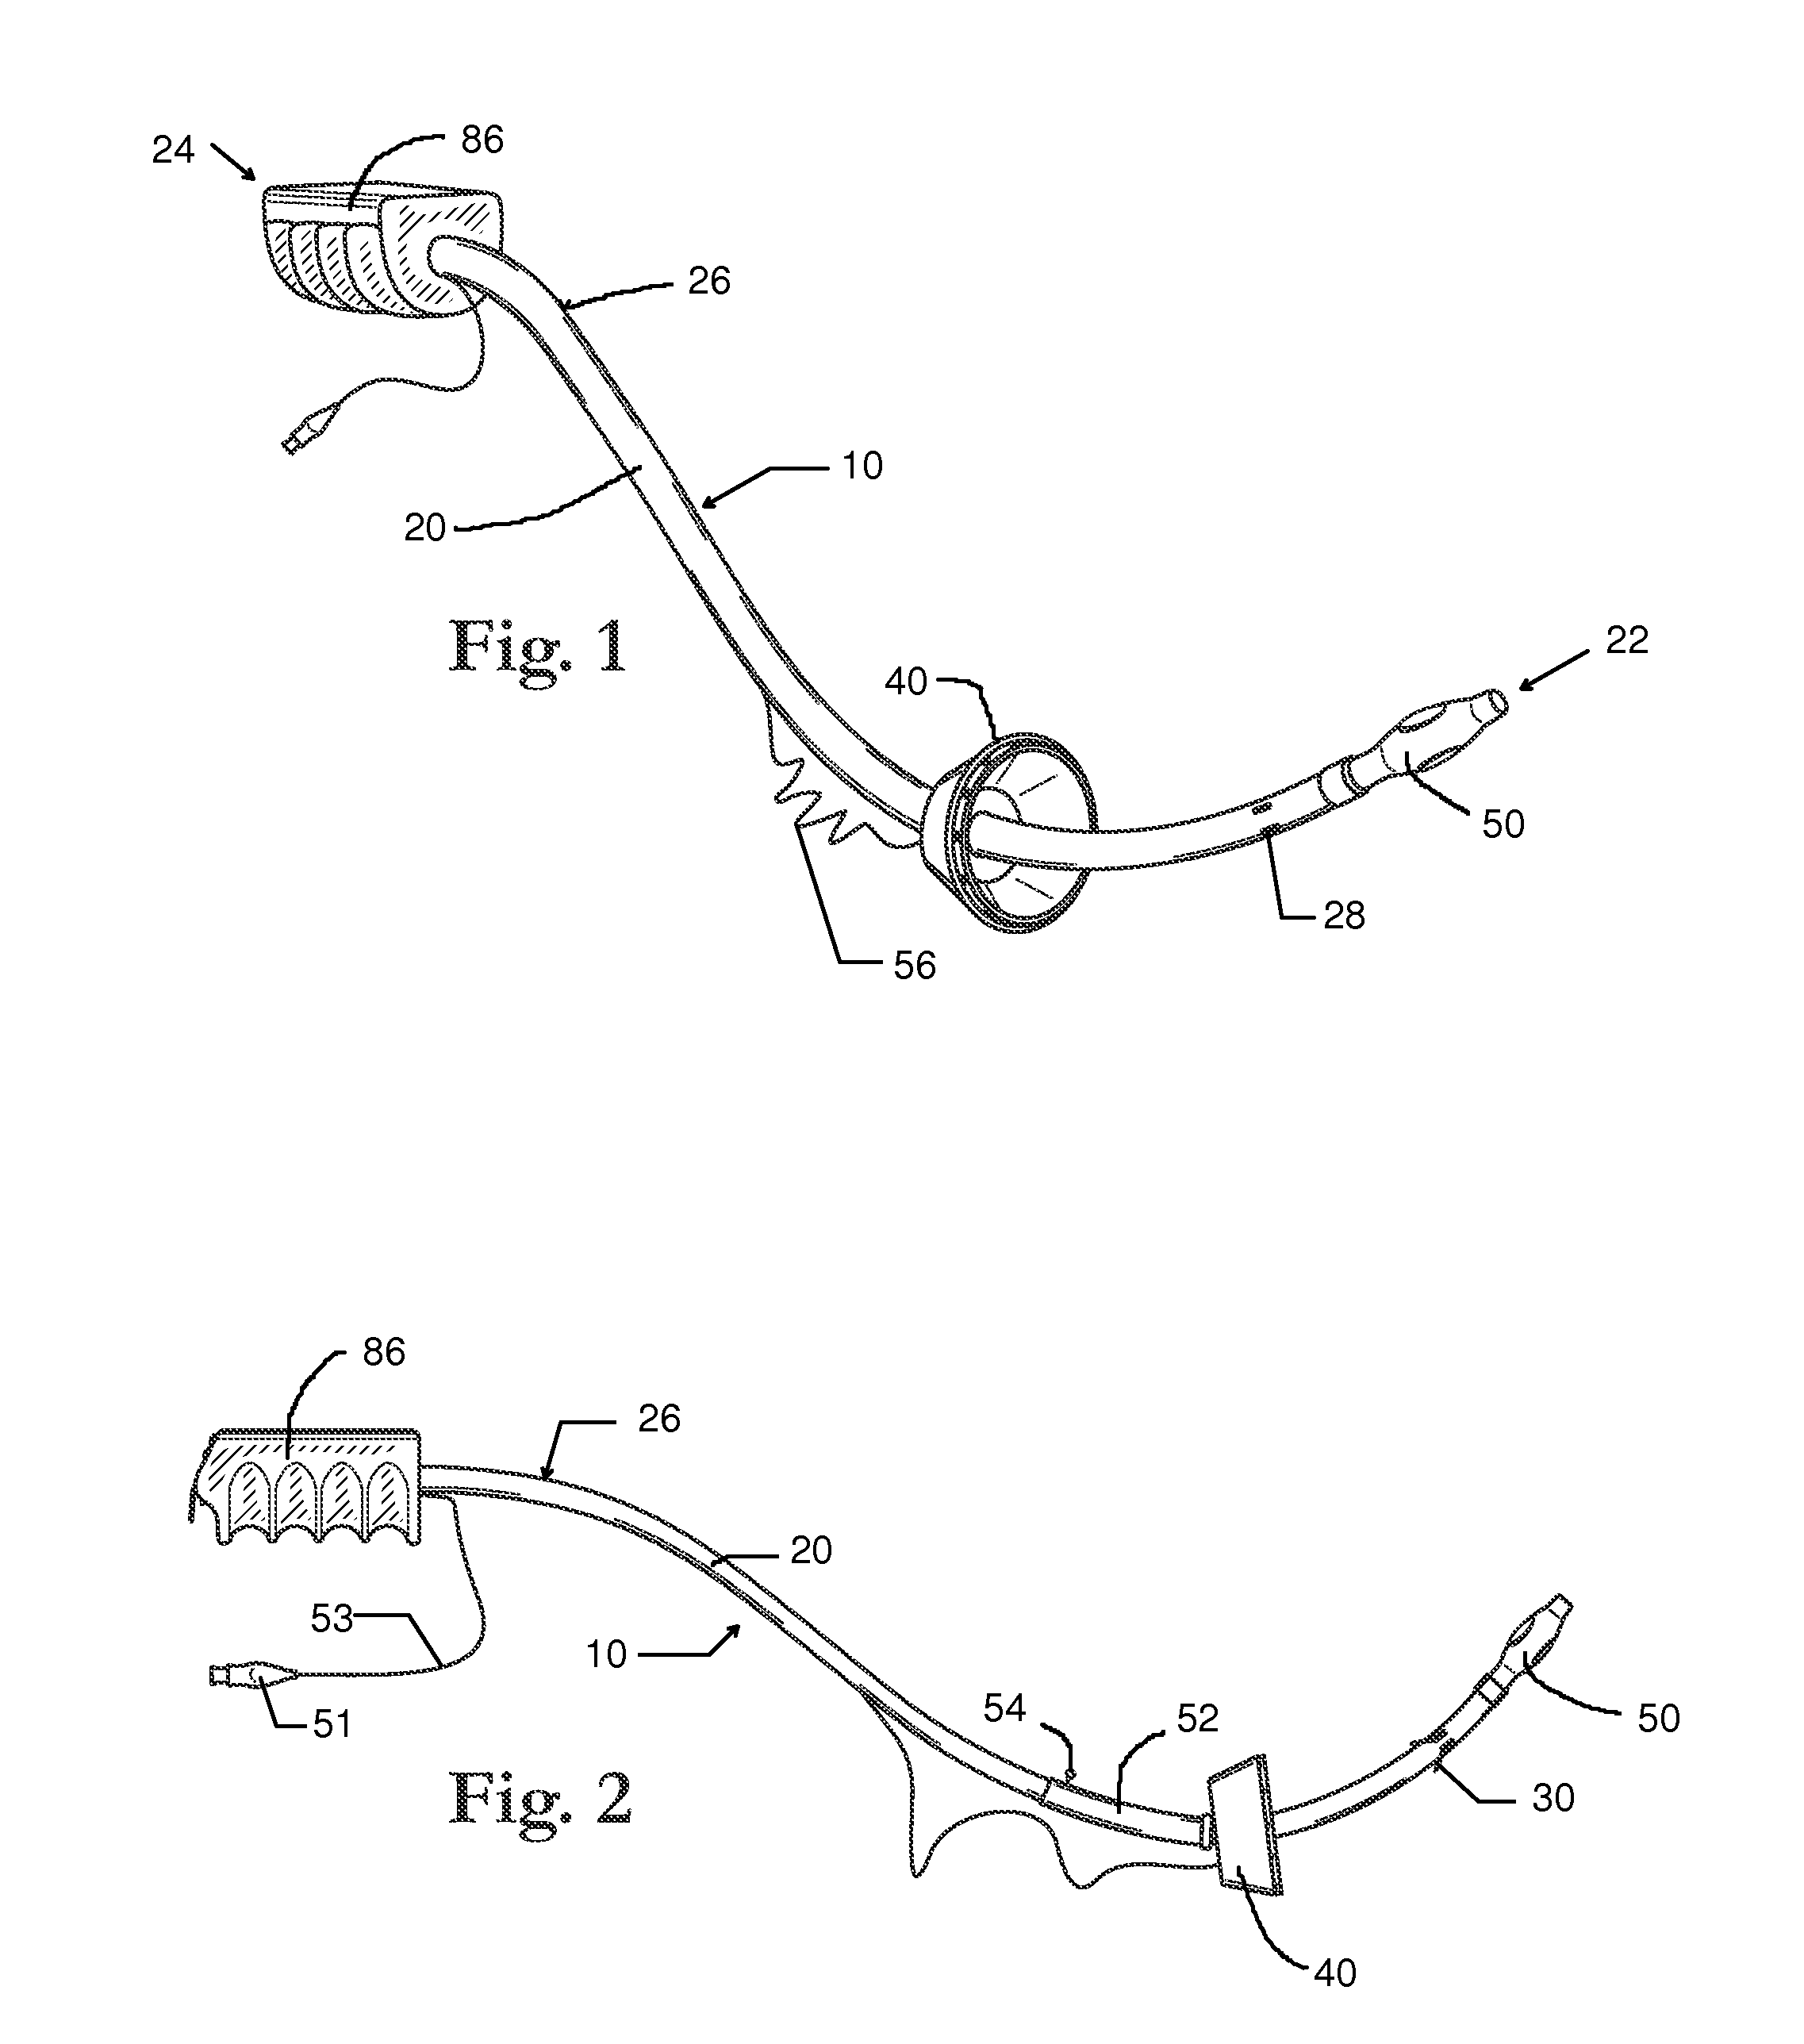 Tissue Removal and Manipulator Device for LAVH and Related Surgeries